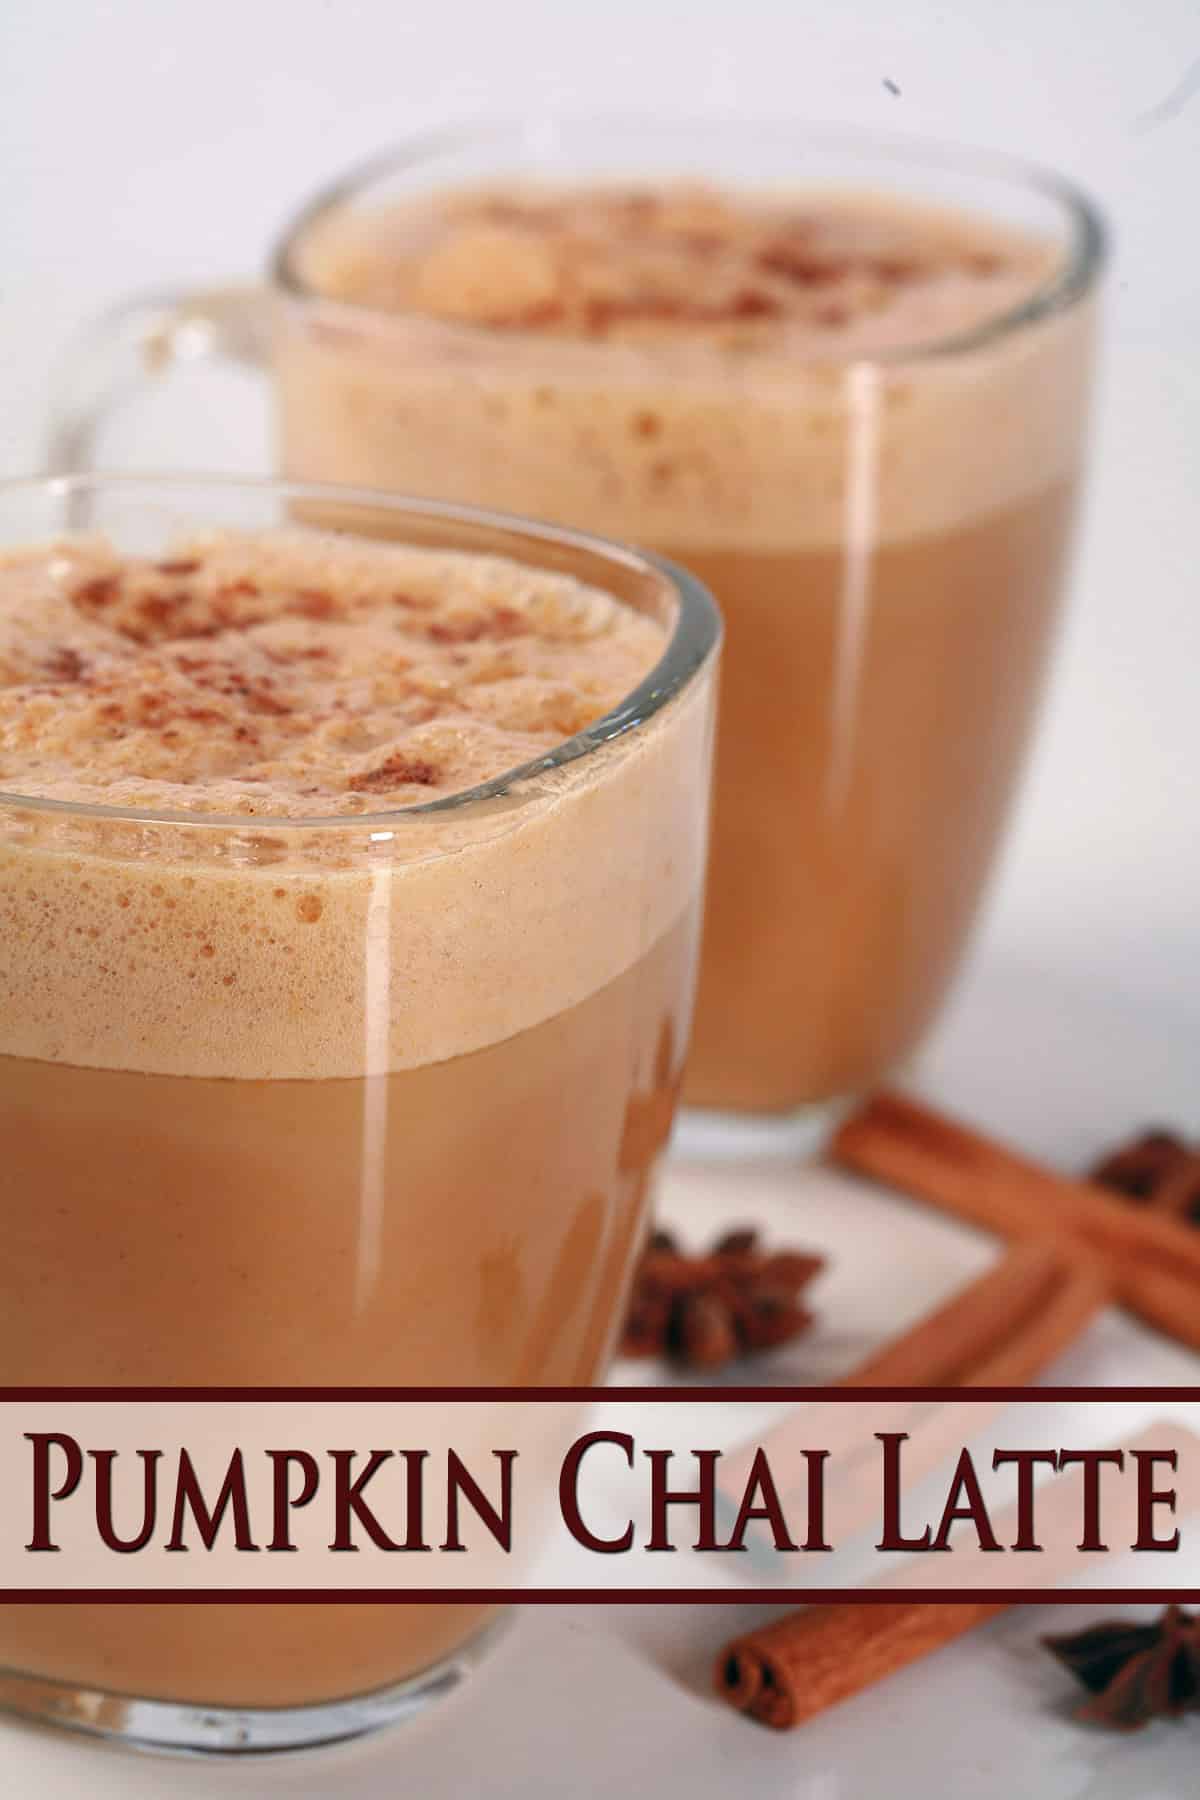 2 Pumpkin Chai Lattes in glass mugs, with cinnamon sticks and star anise around them.